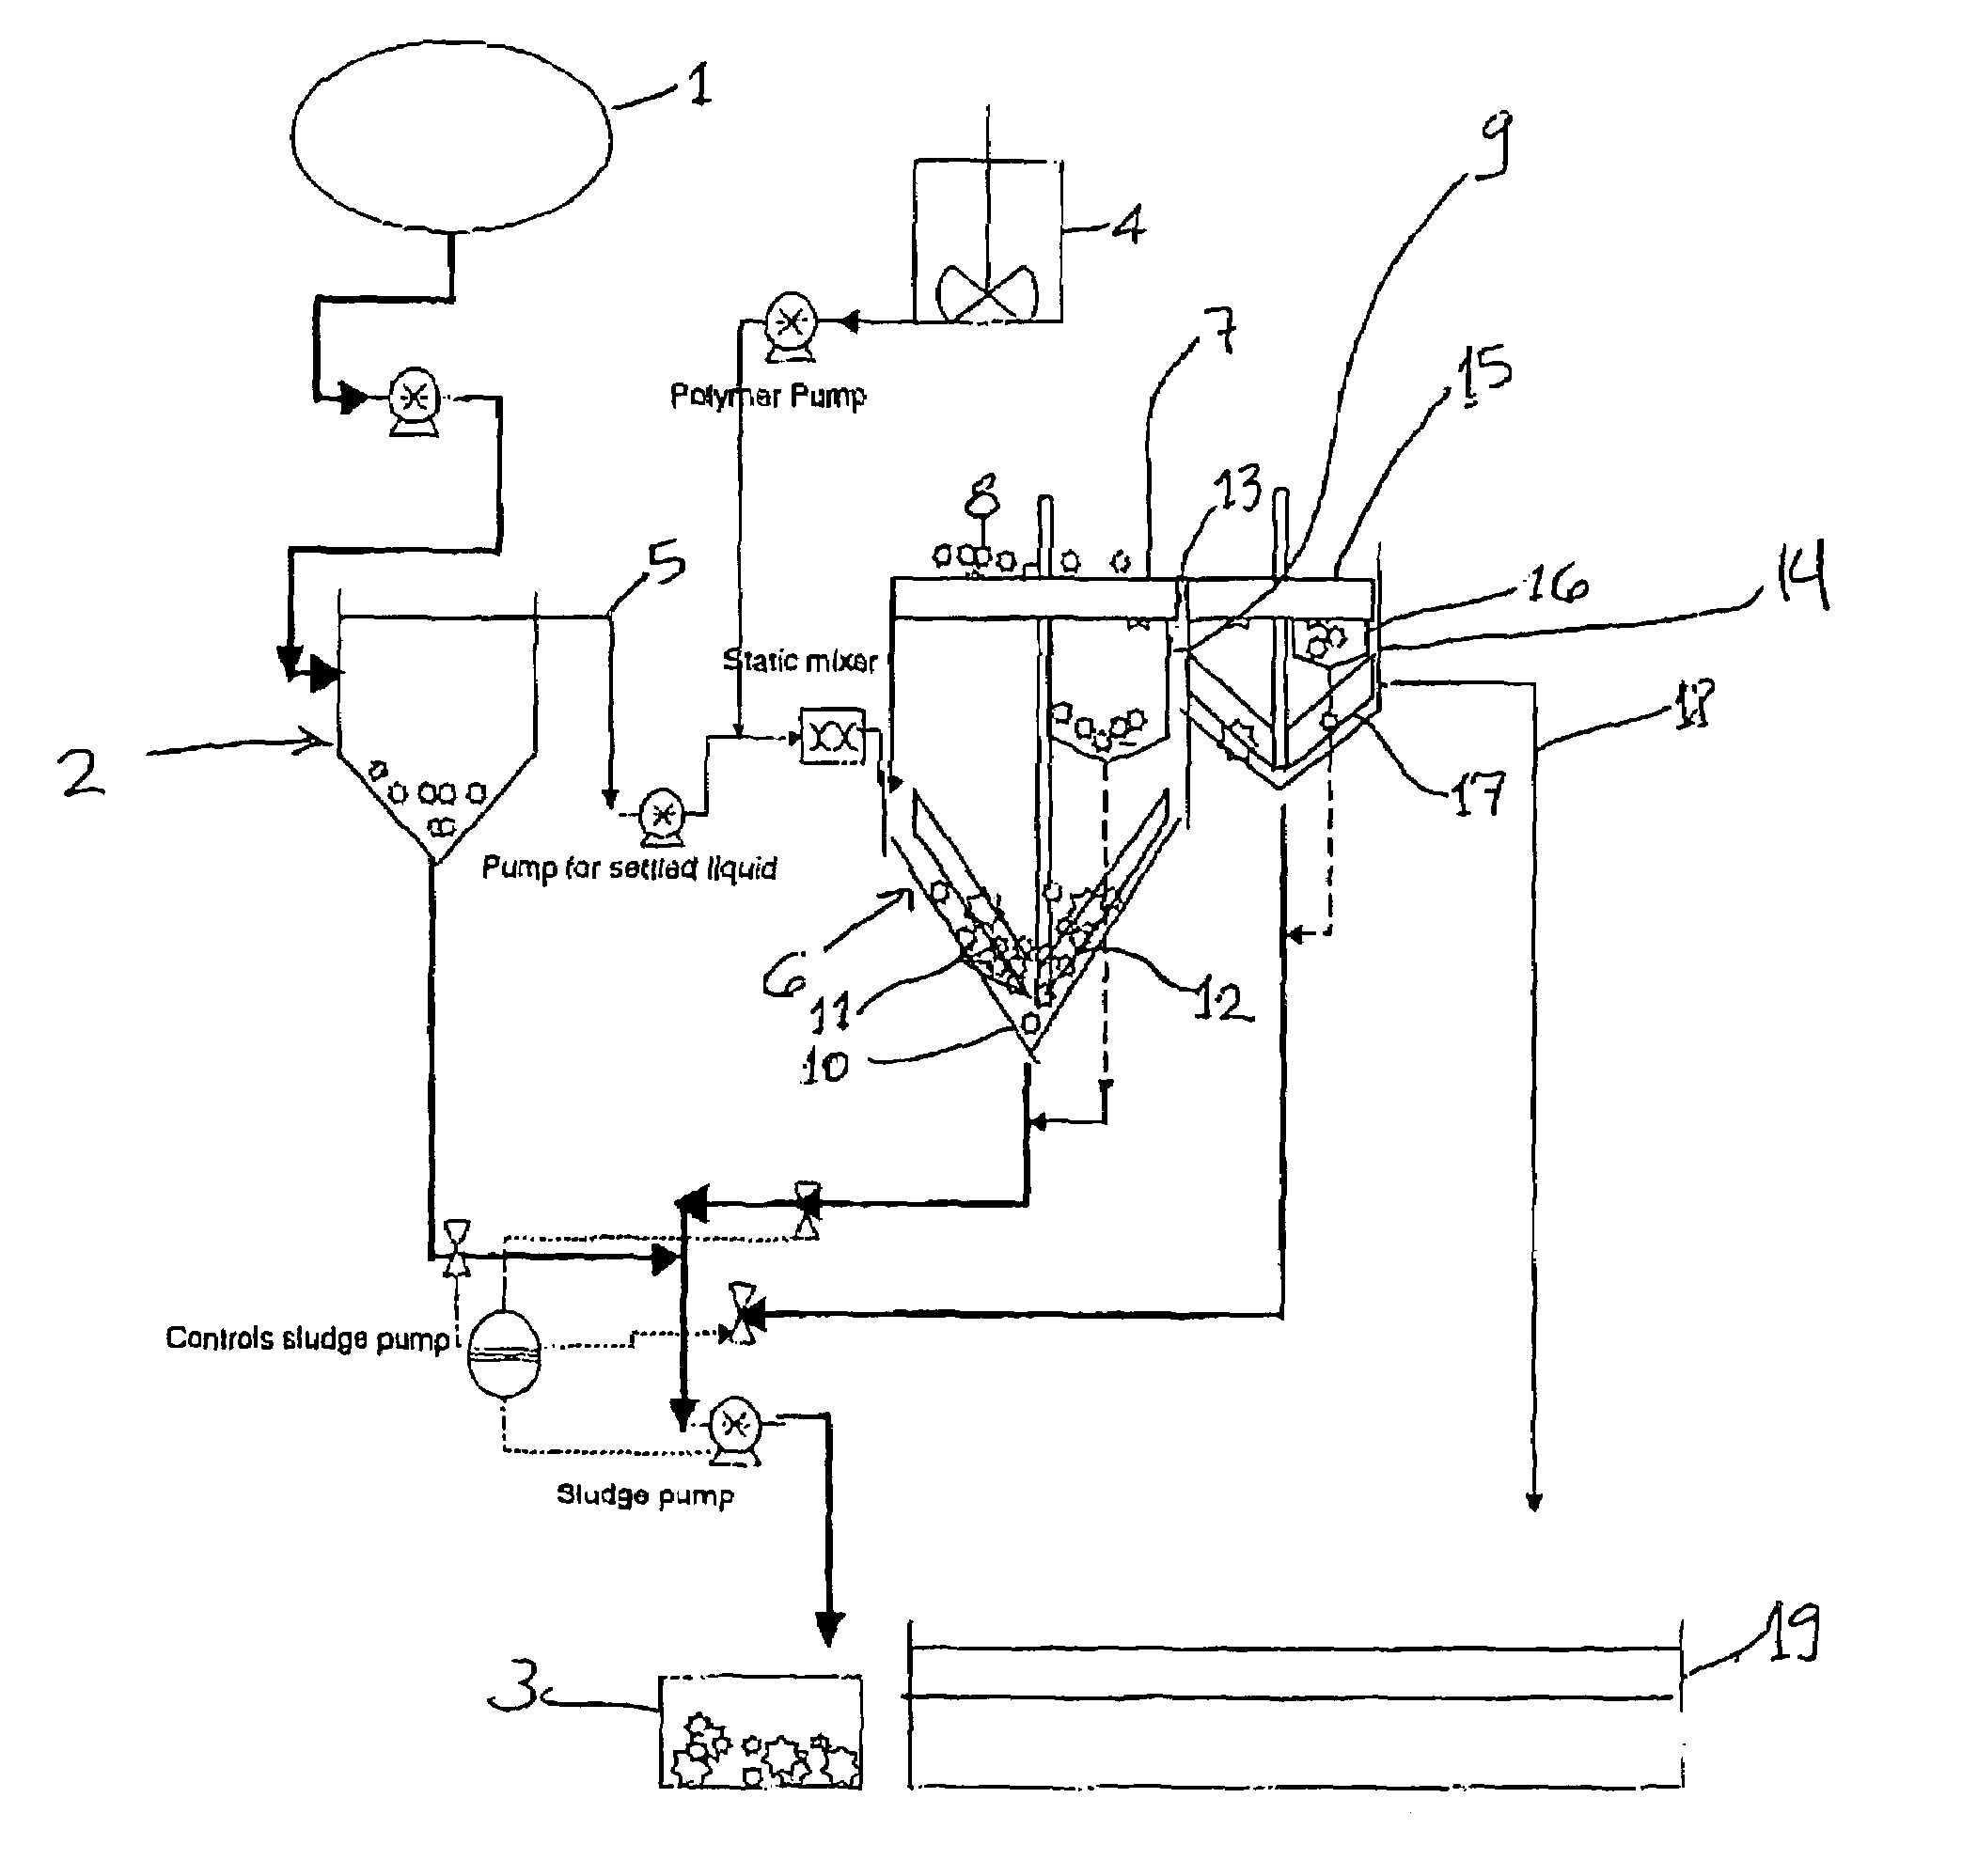 Methods and apparatus for treating animal manure